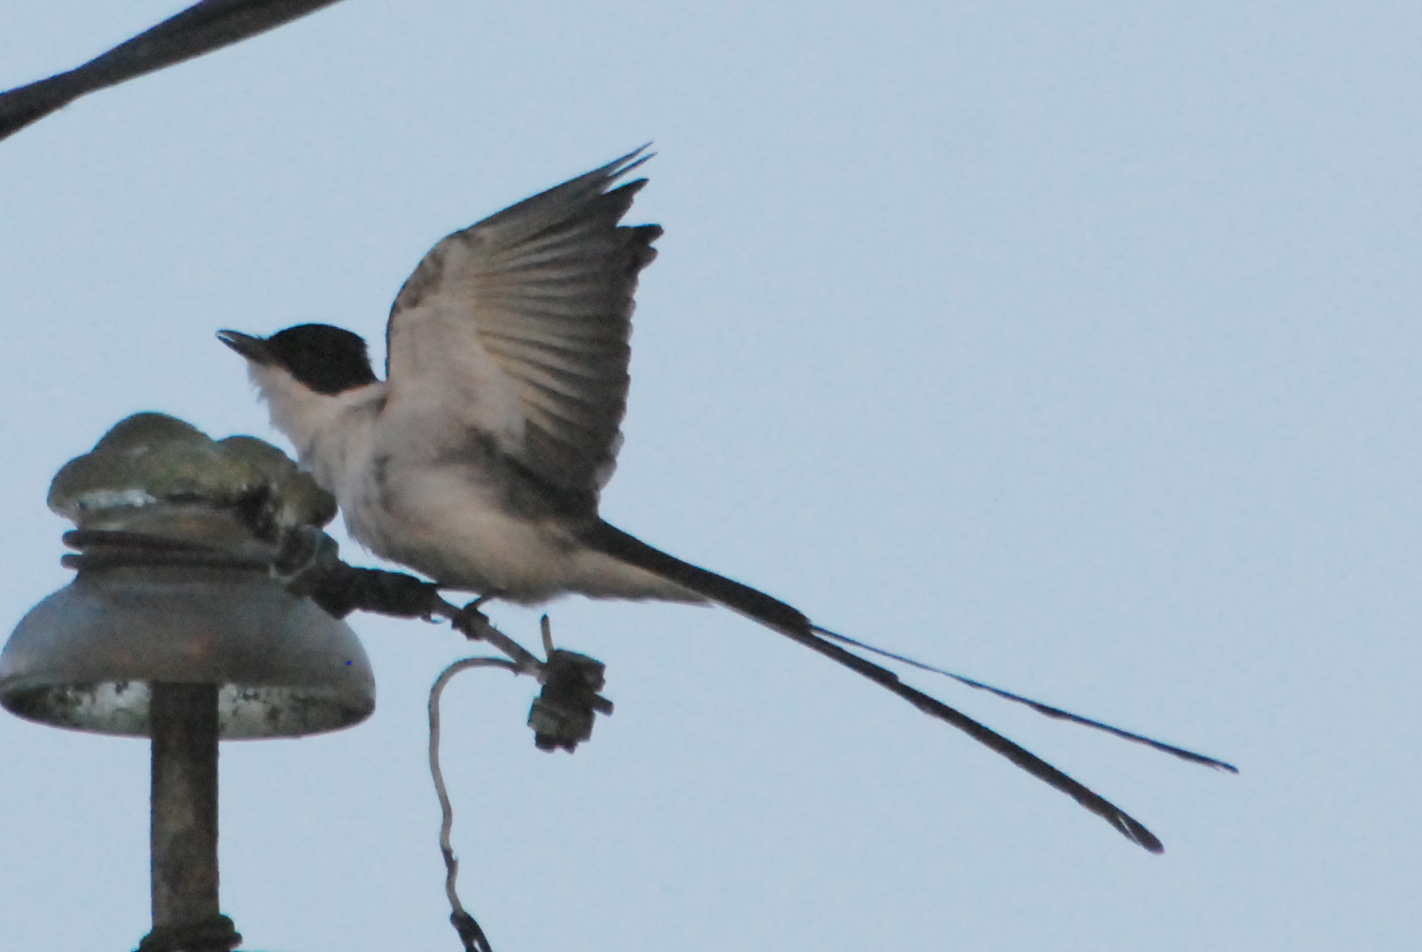 Click picture to see more Fork-tailed Flycatchers.